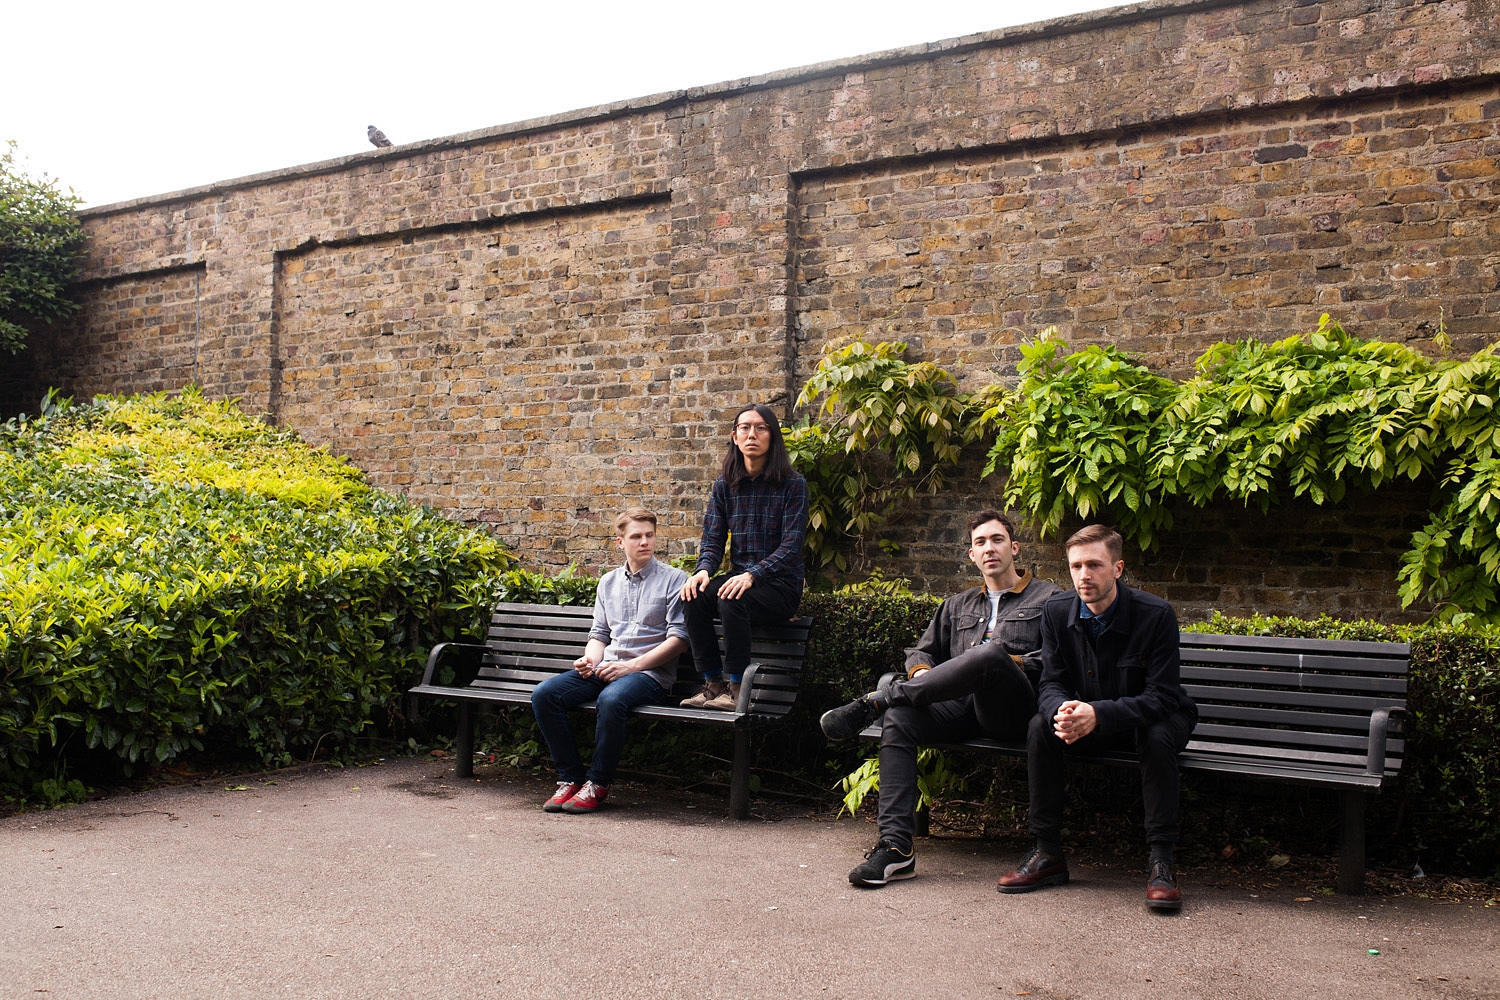 Teleman: “It’s about mixing business and pleasure.”